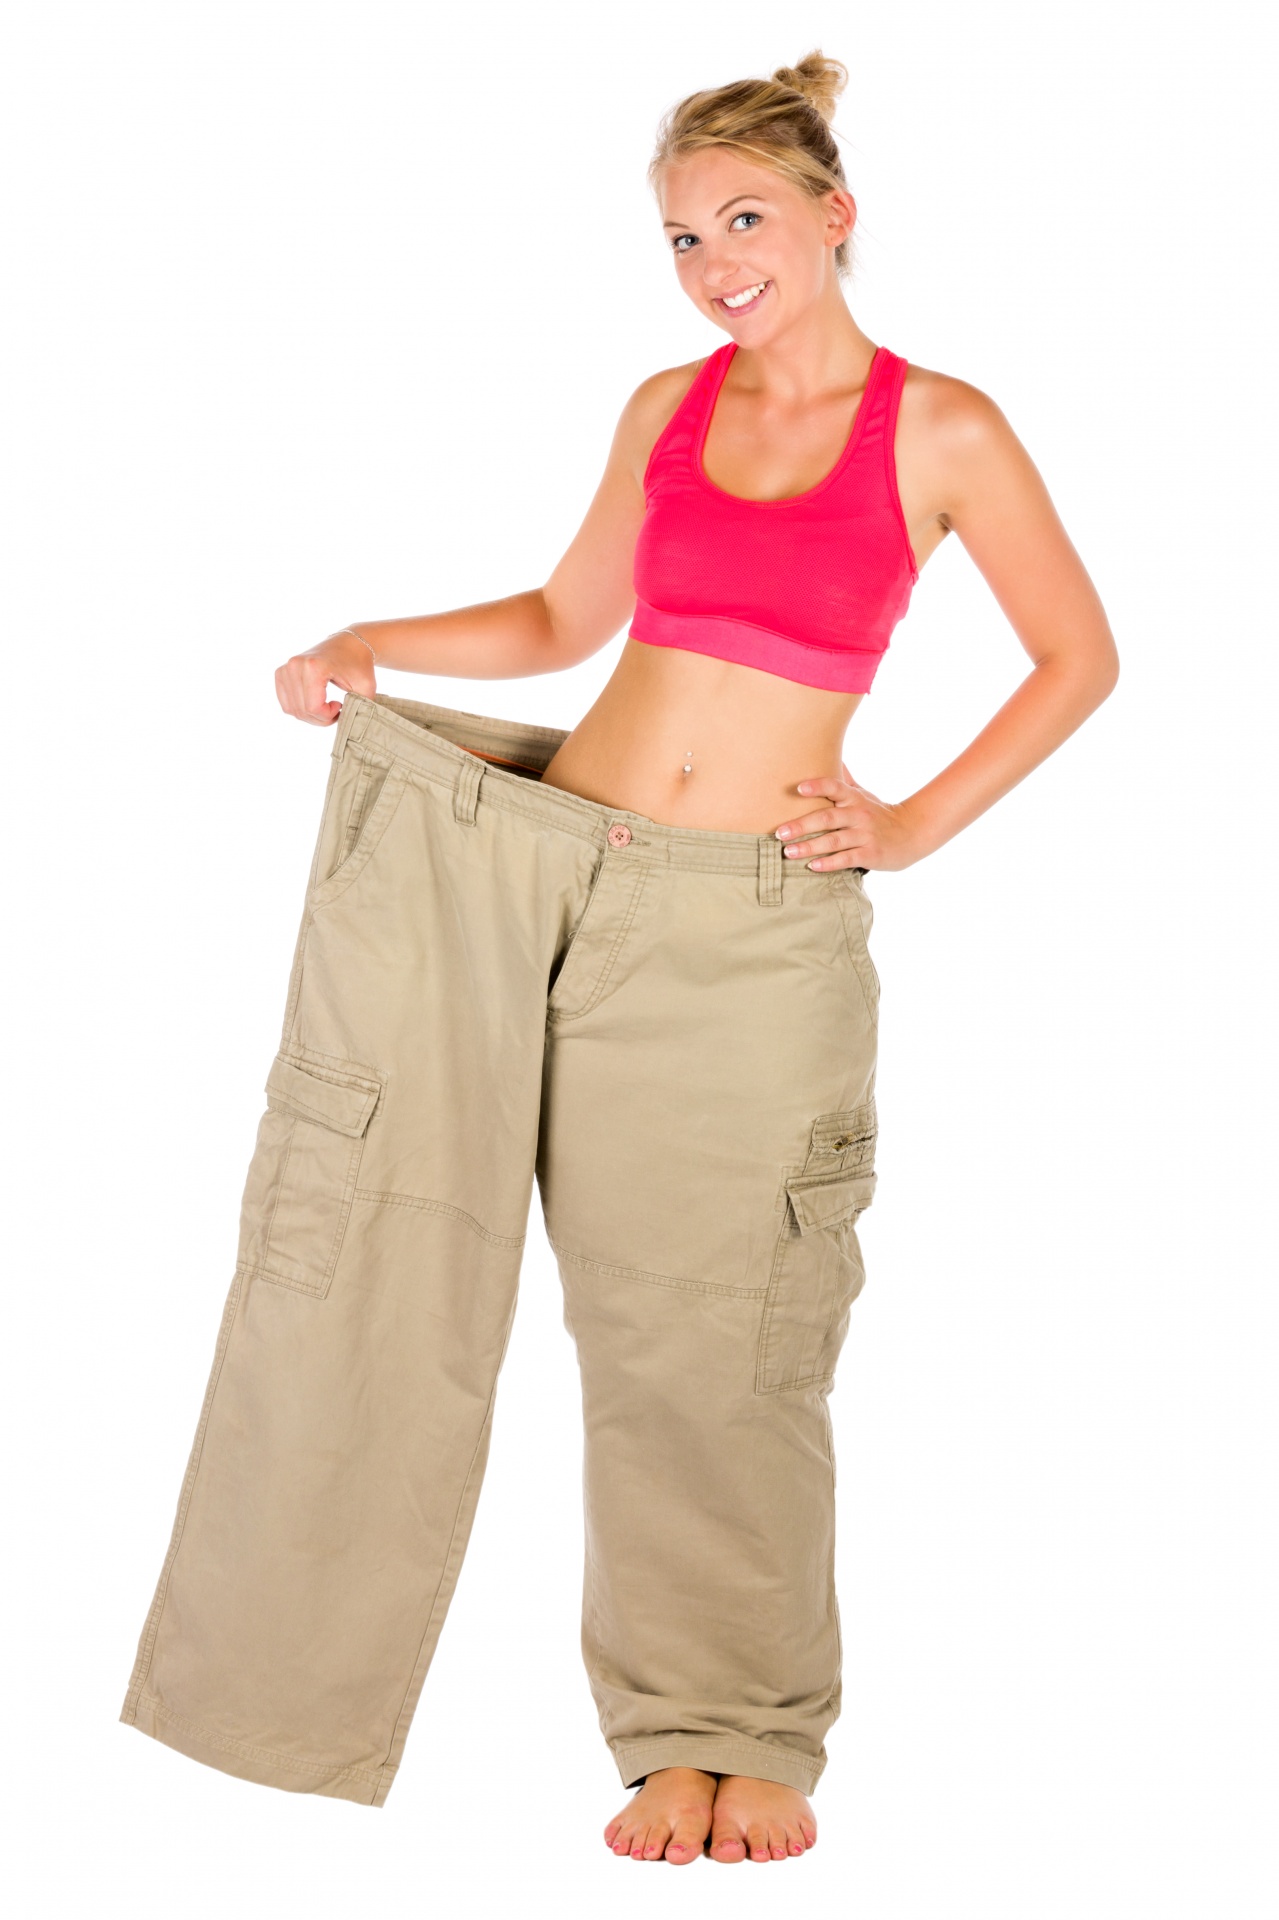 weight-loss-free-stock-photo-public-domain-pictures